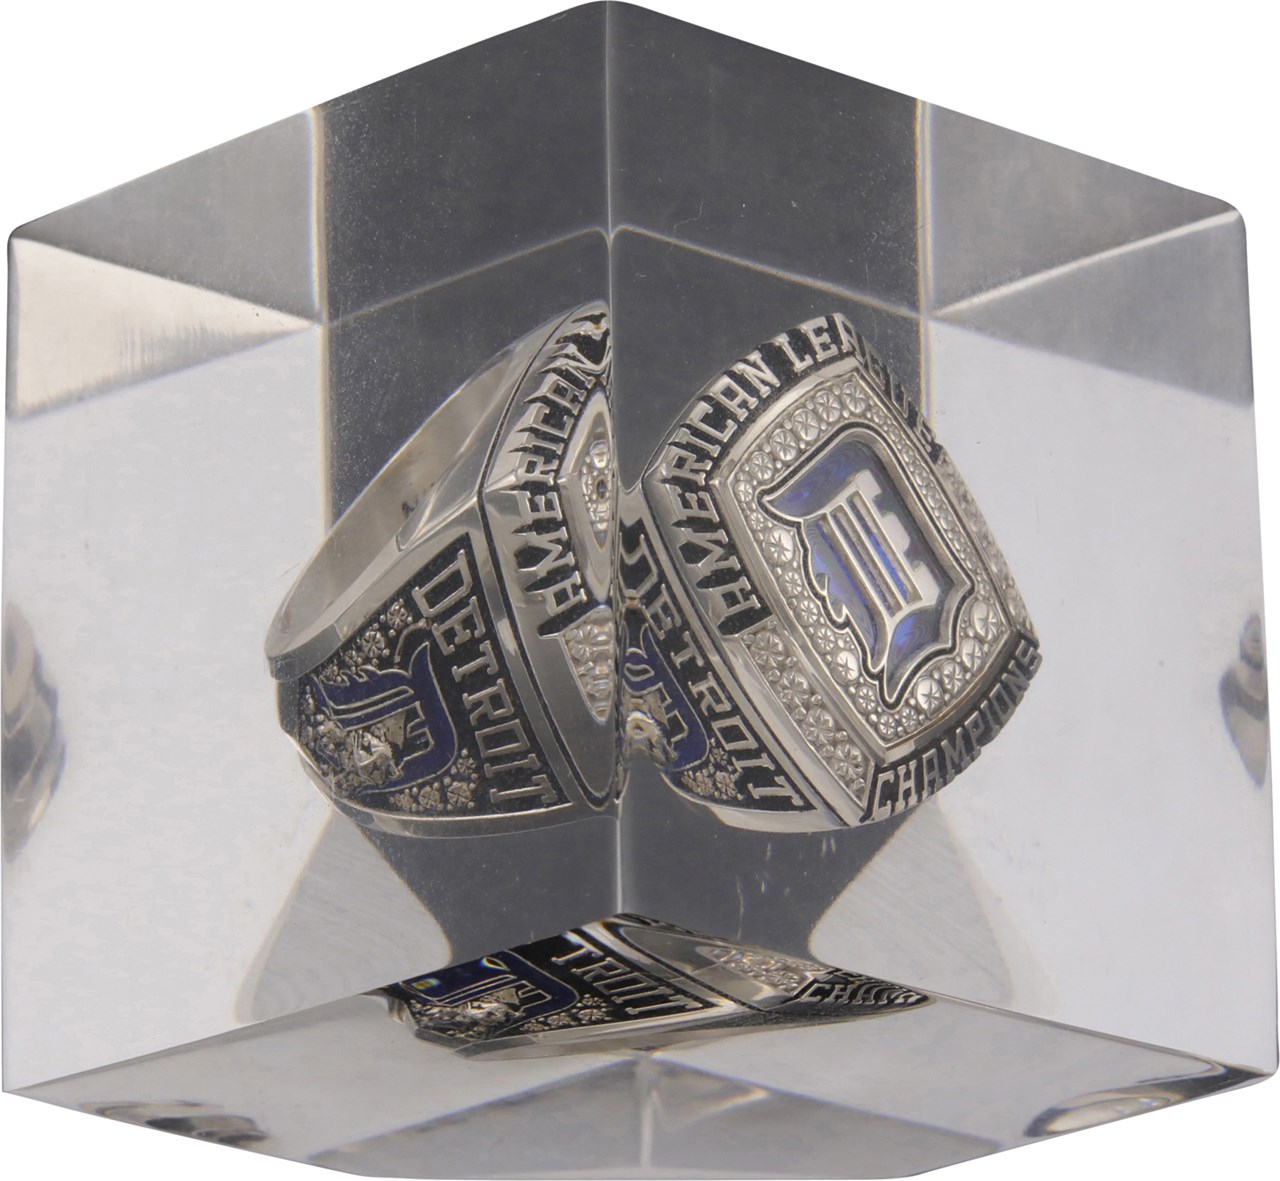 - 2006 Detroit Tigers American League Championship Ring in Lucite